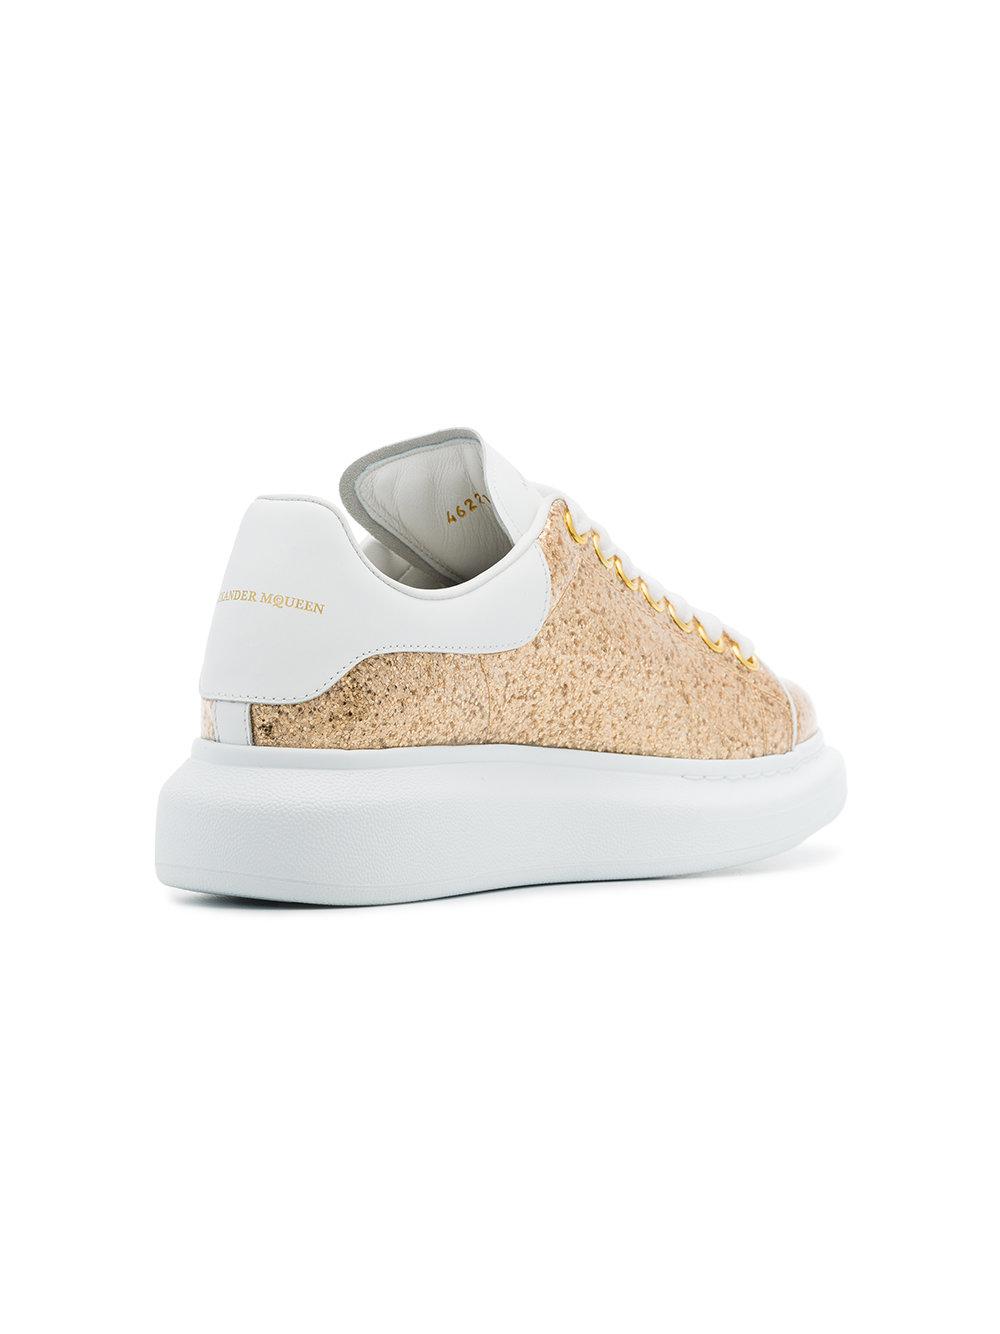 Alexander McQueen Gold Oversized Leather Glitter Sneakers in White ...